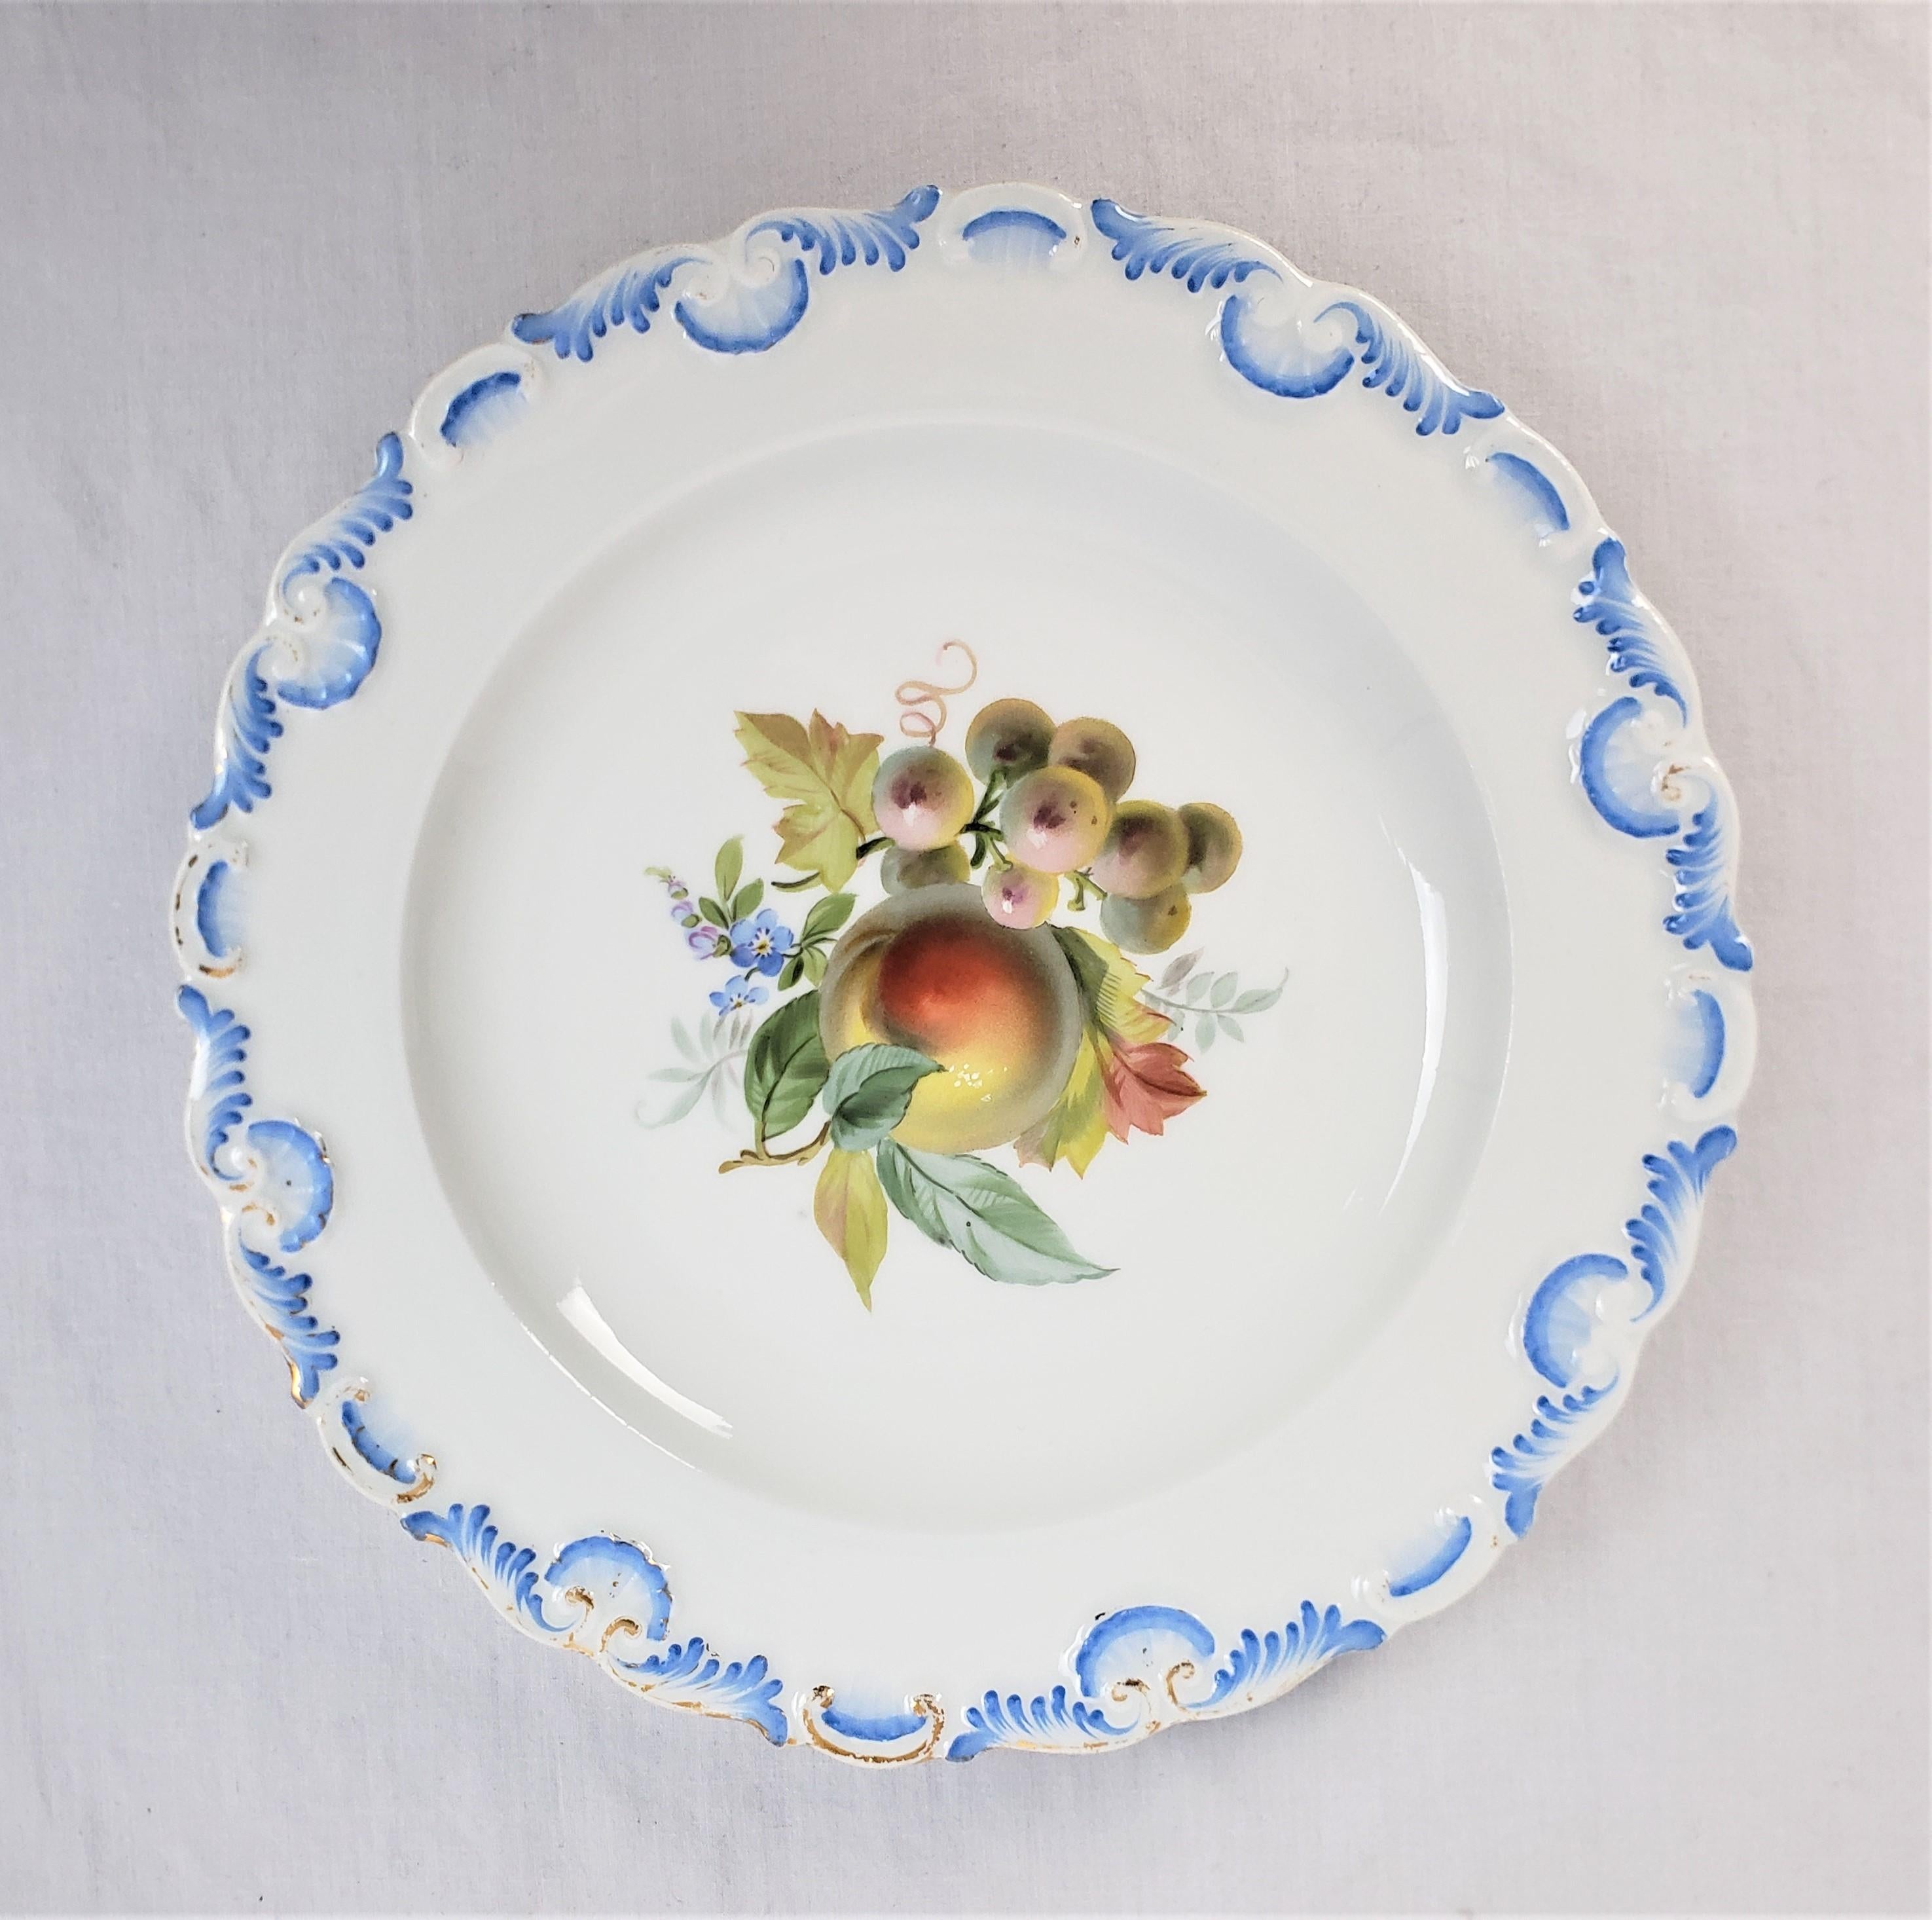 Antique Meissen Set of 13 Hand-Painted Desert Plates with Fruit Decoration In Good Condition For Sale In Hamilton, Ontario